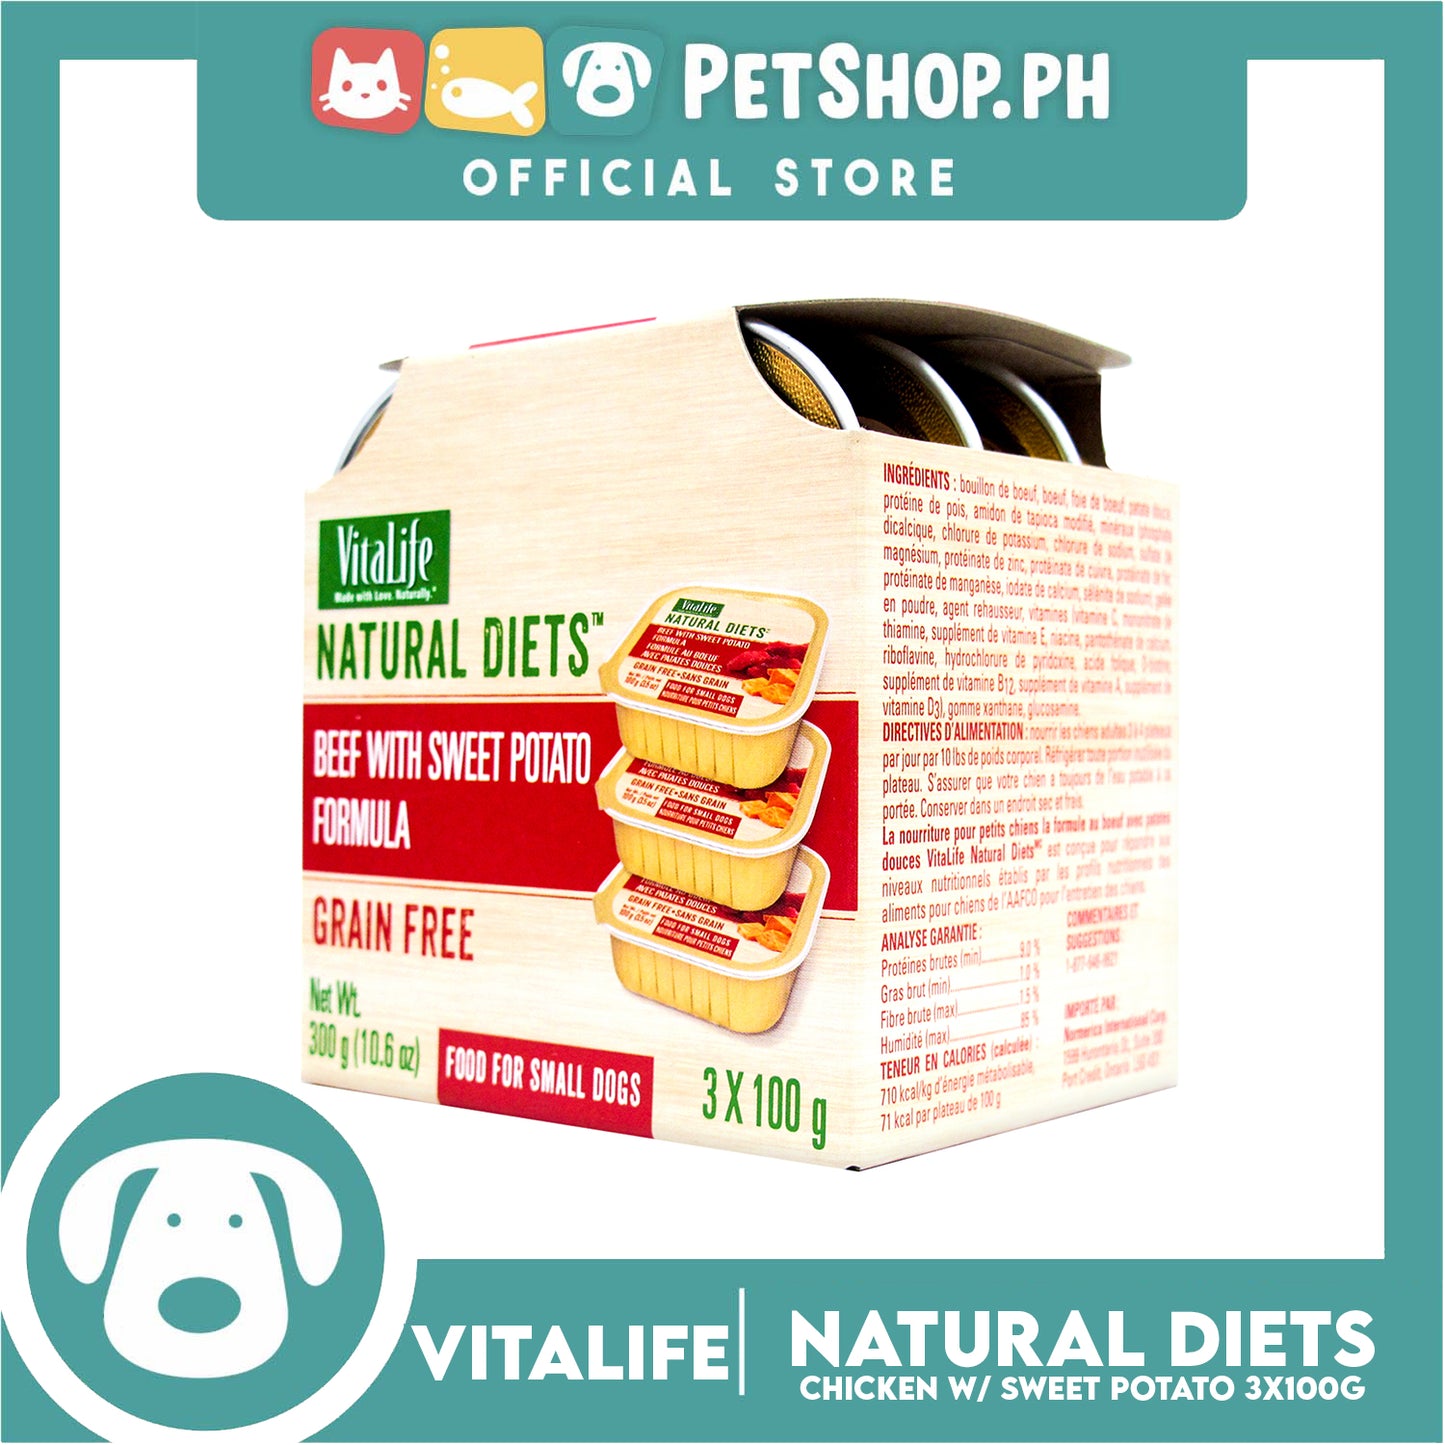 3pcs VitaLife Natural Diets, Grain Free 100g (Beef With Sweet Potato Formula) Dog Food for Small Dogs, Dog Wet Food